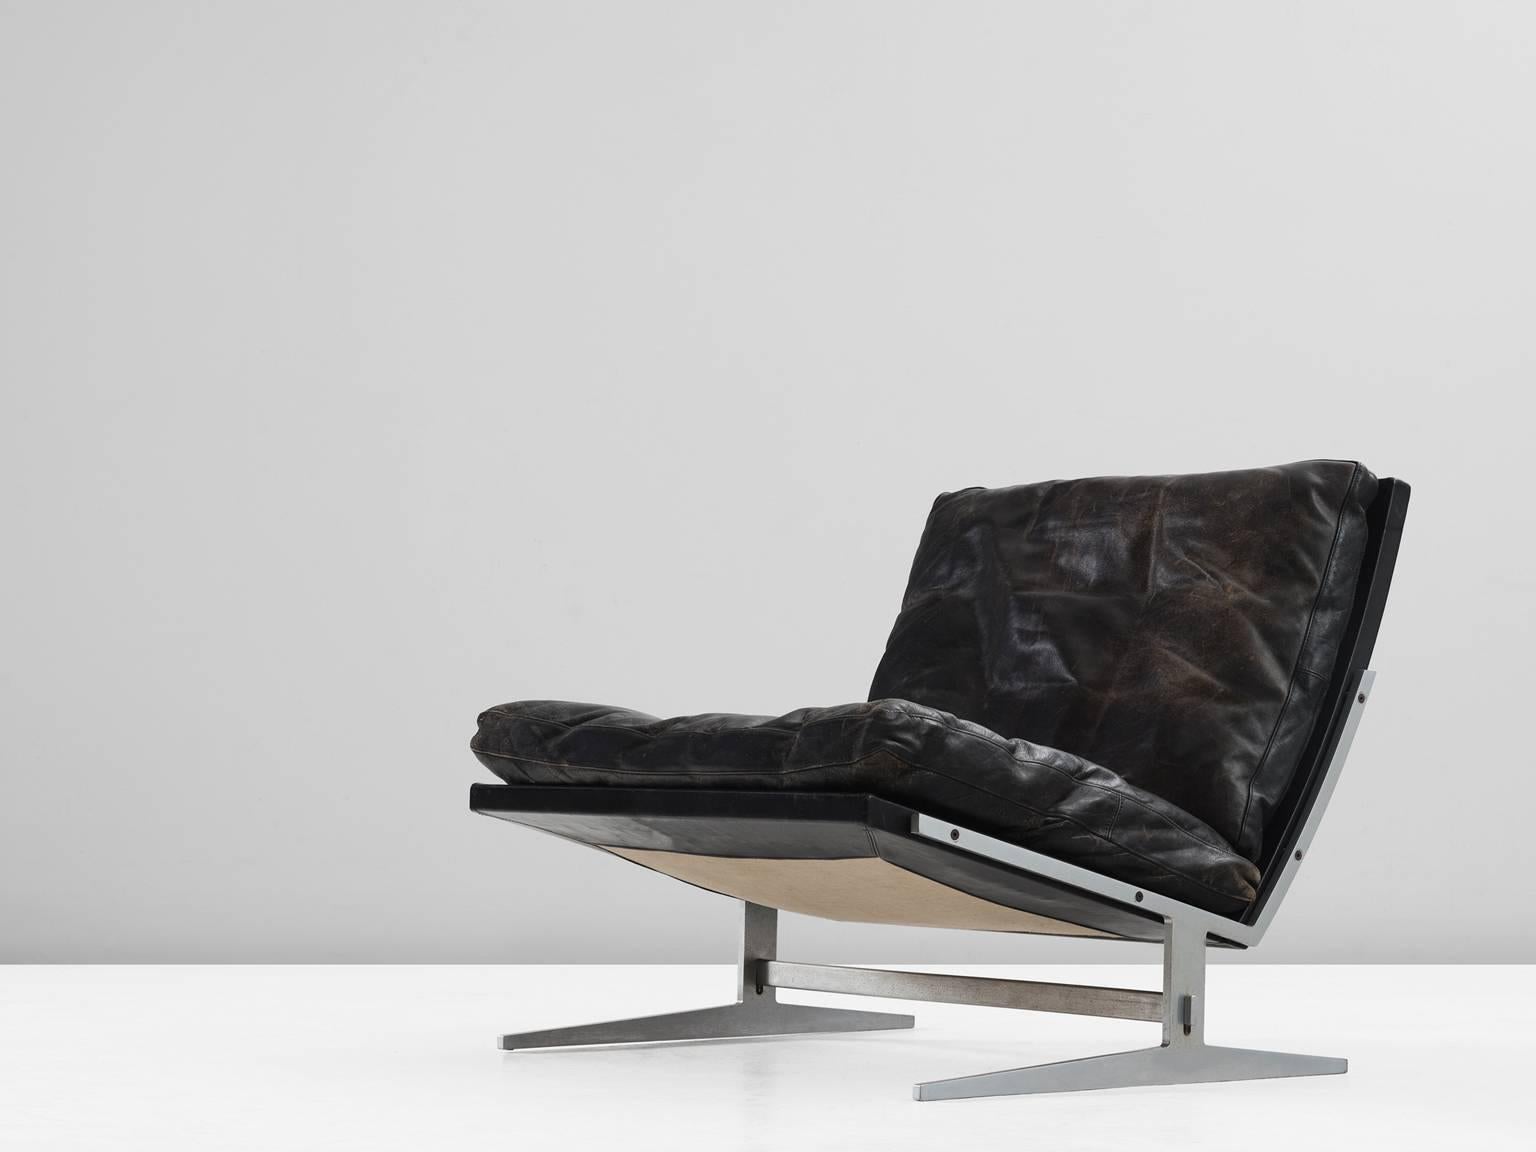 Lounge chair model BO561, in brushed steel and leather, by Preben Fabricius & Jørgen Kastholm, Denmark, 1962. 

Modern slipper chair in steel and leather. This chair holds an L-shaped seating. This shape is repeated in the legs. A double L is